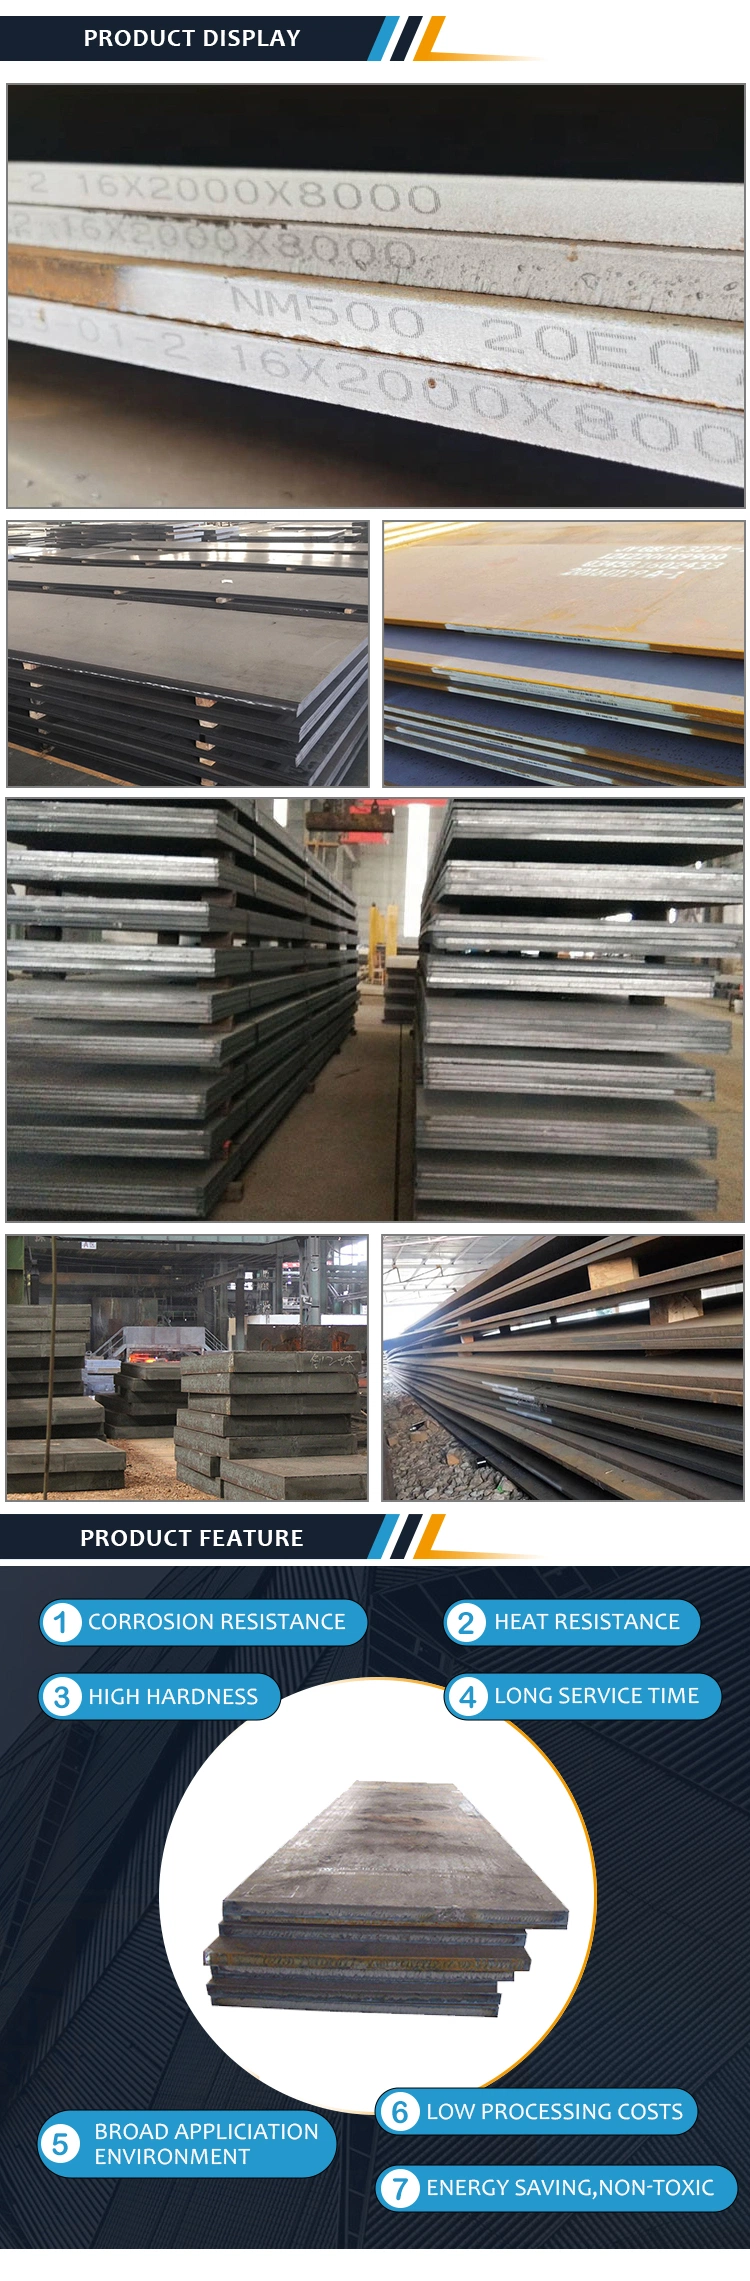 China Made ASTM A572 Grade 50 Carbon Steel Sheet as Kitchenware